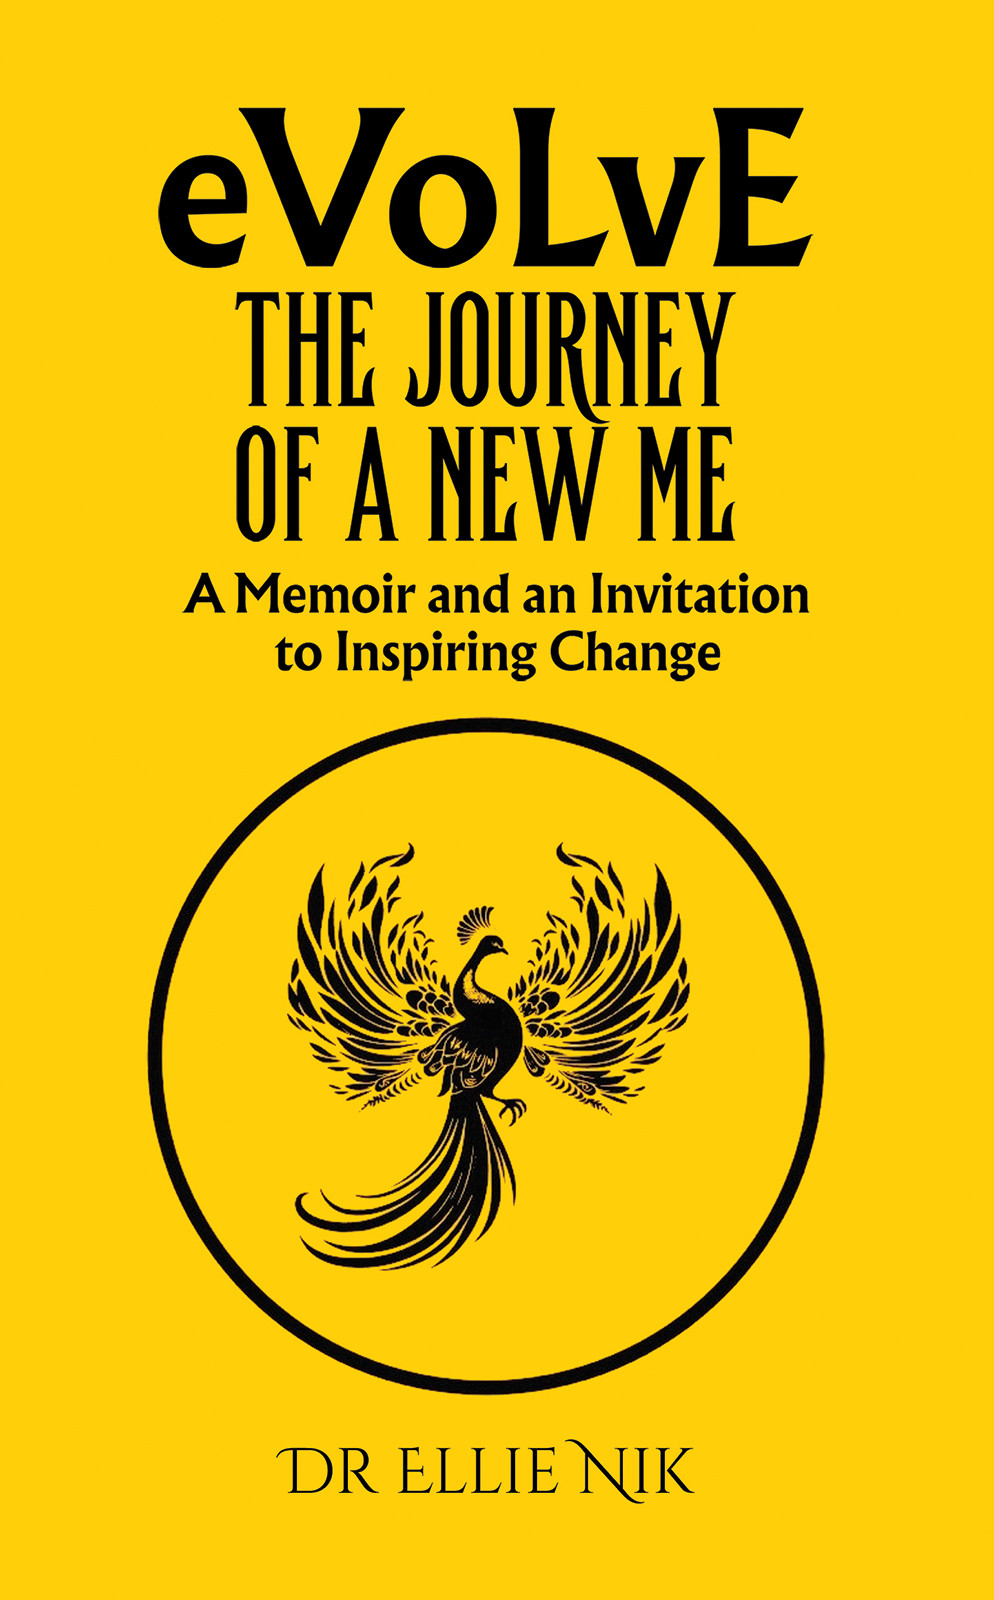 Evolve: The Journey of a New Me